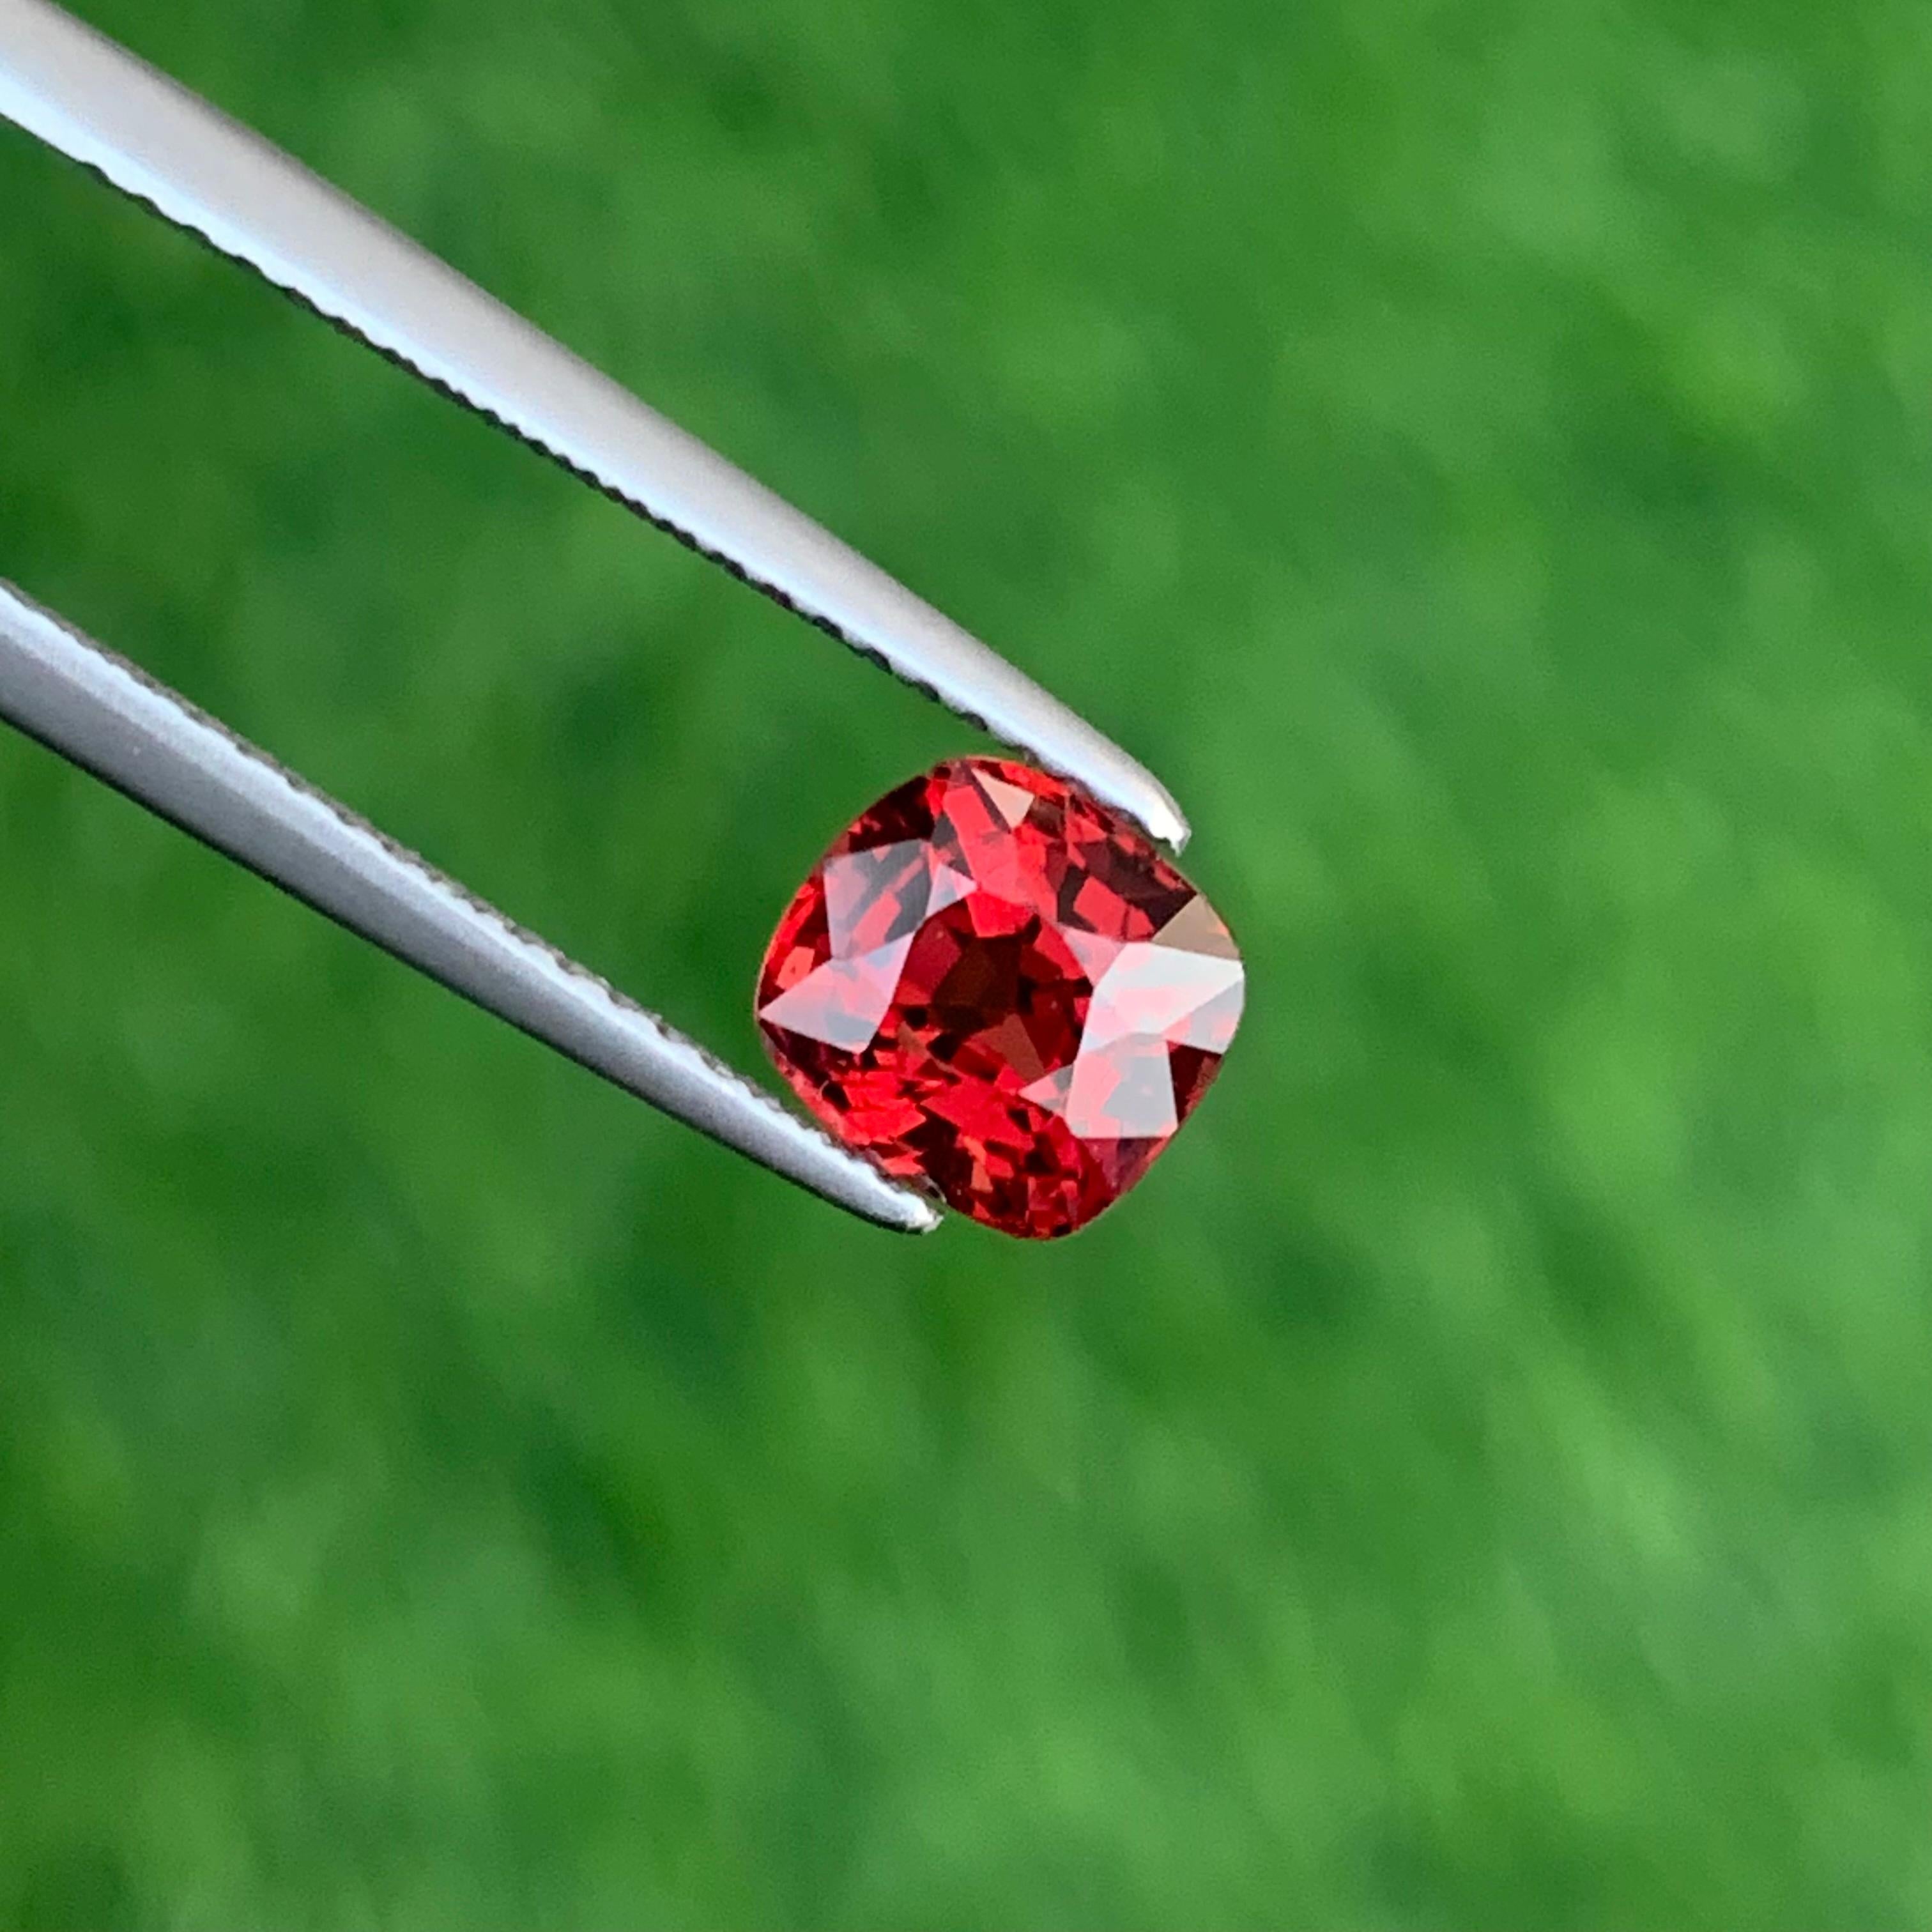 Loose Spinel
Weight : 1.05 Carats
Dimensions : 5.9x5.8x4.1 Mm
Origin : Burma Myanmar
Clarity : Eye Clean
Shape: Cushion Cut
Treatment: Non
Certificate: On demand
Spinel gems are said to help set aside egos and become devoted to another person. Like